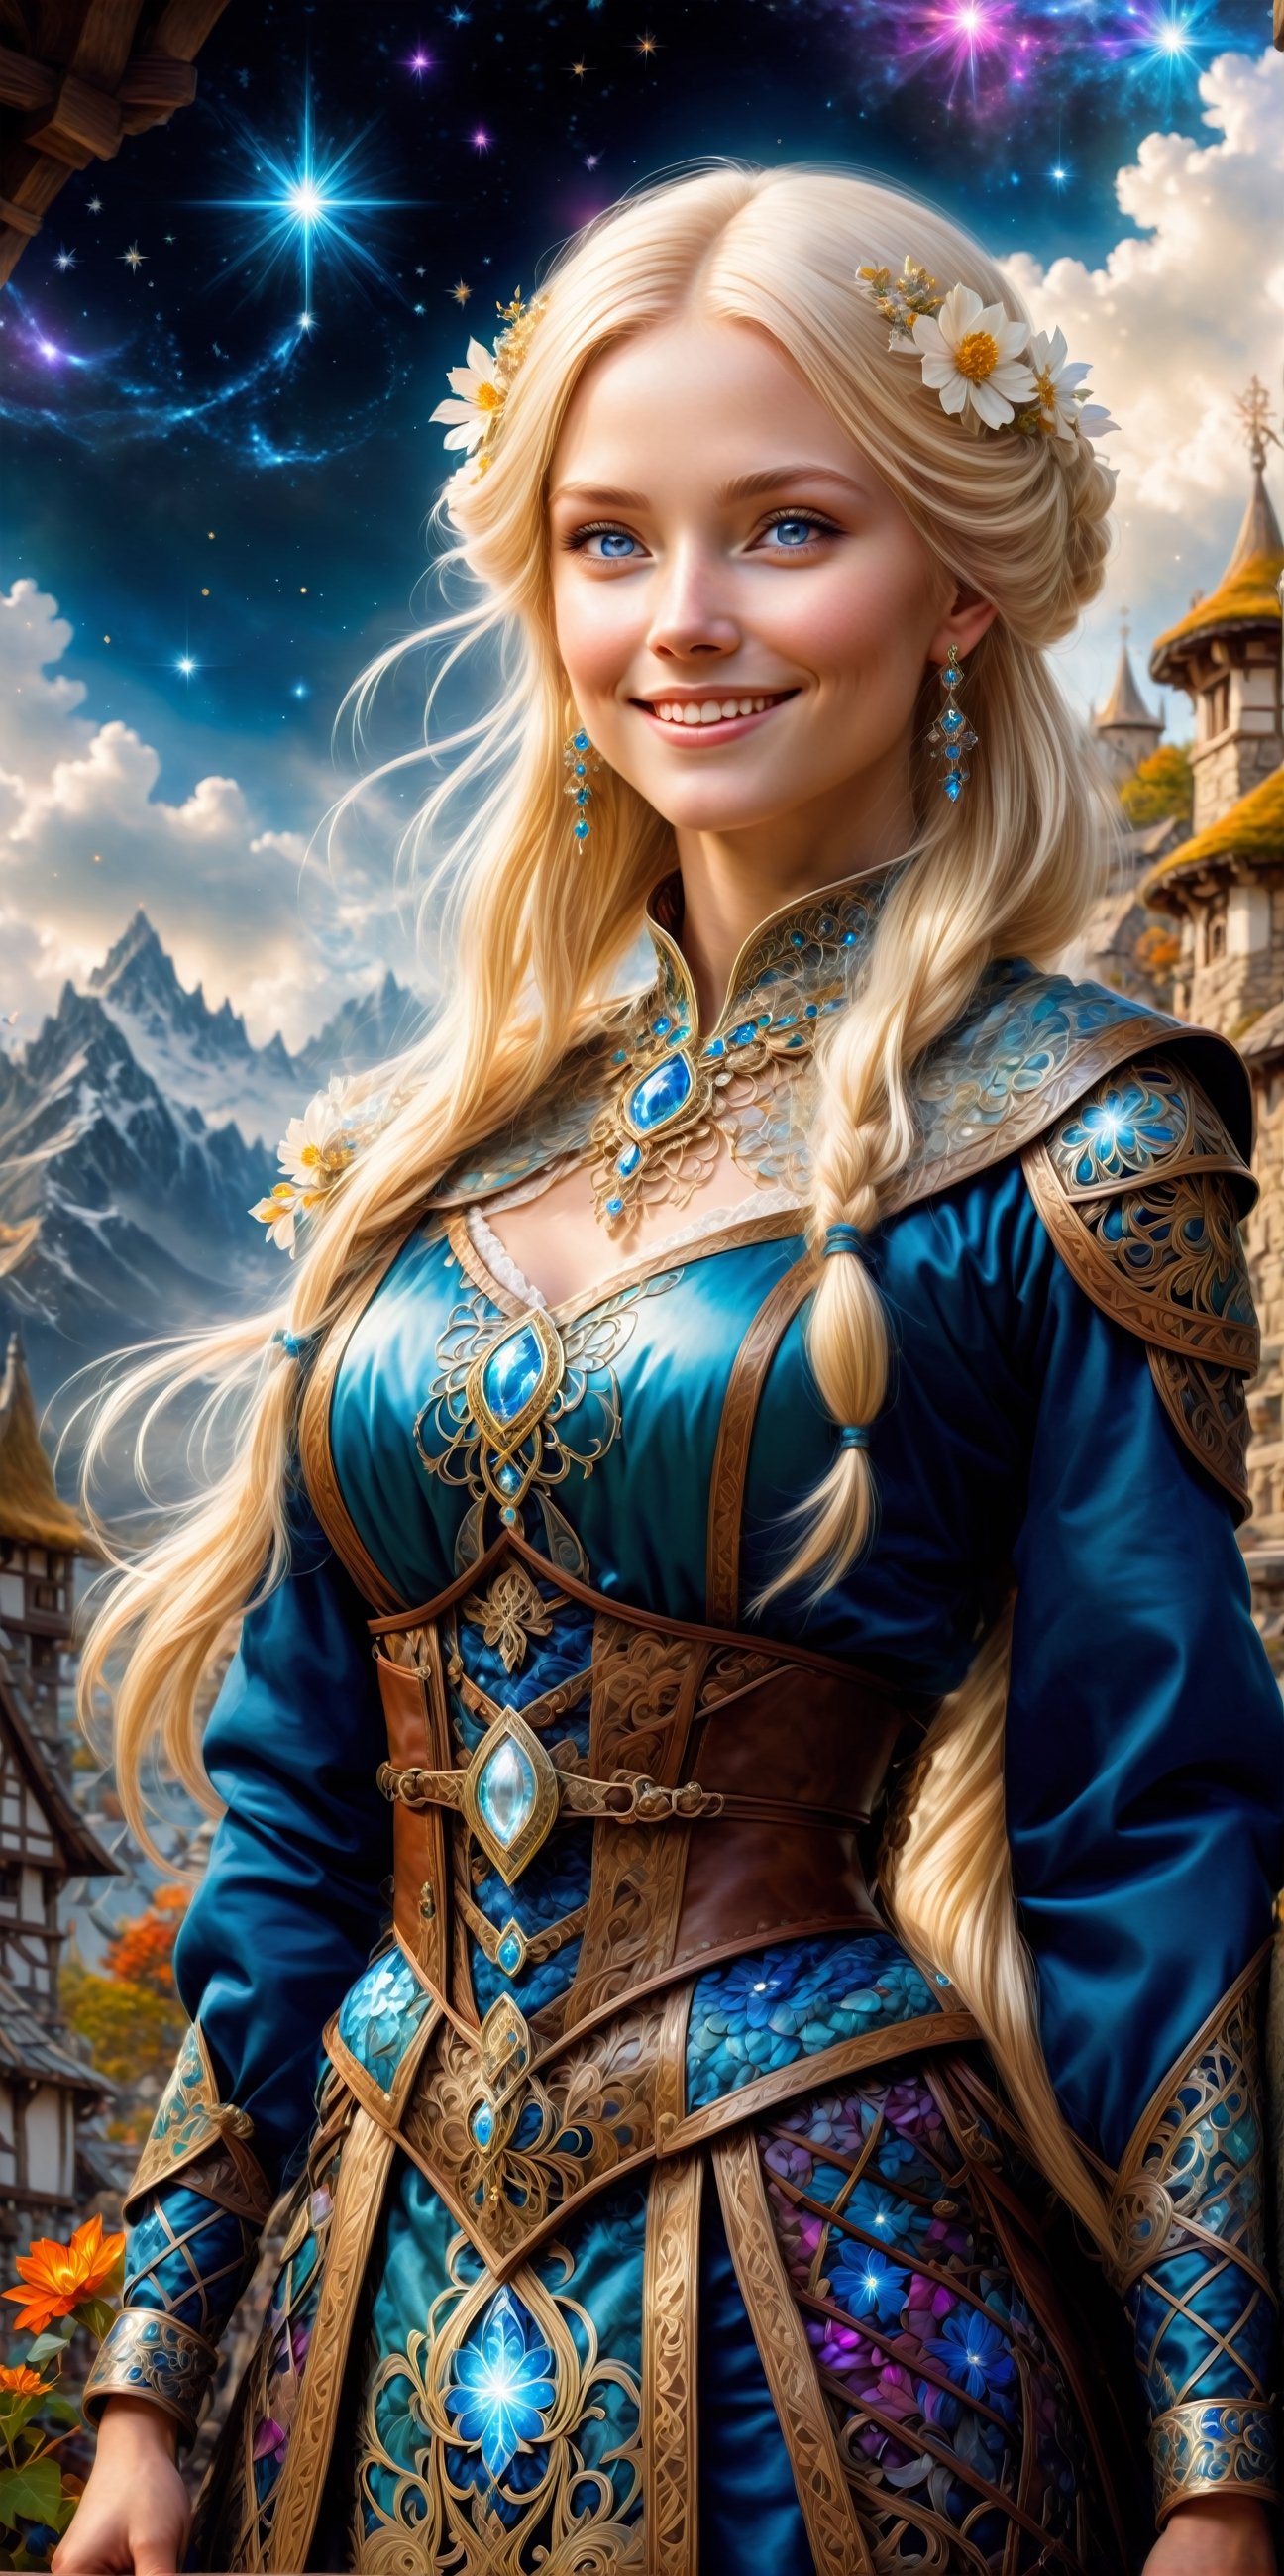 Extreme detailed,ultra Realistic,natural smile,looking up,
beautiful young Viking lady,platinum blonde shining hair, blue eyes,fractal art Clothes,
Wearing Viking royal  highly detailed clothes, adorned with laces and floral elements, luxurious laces,
bending posture, looking into the distance, 
beauty village background,
,ol1v1adunne,Wonder of Beauty,Magical Fantasy style